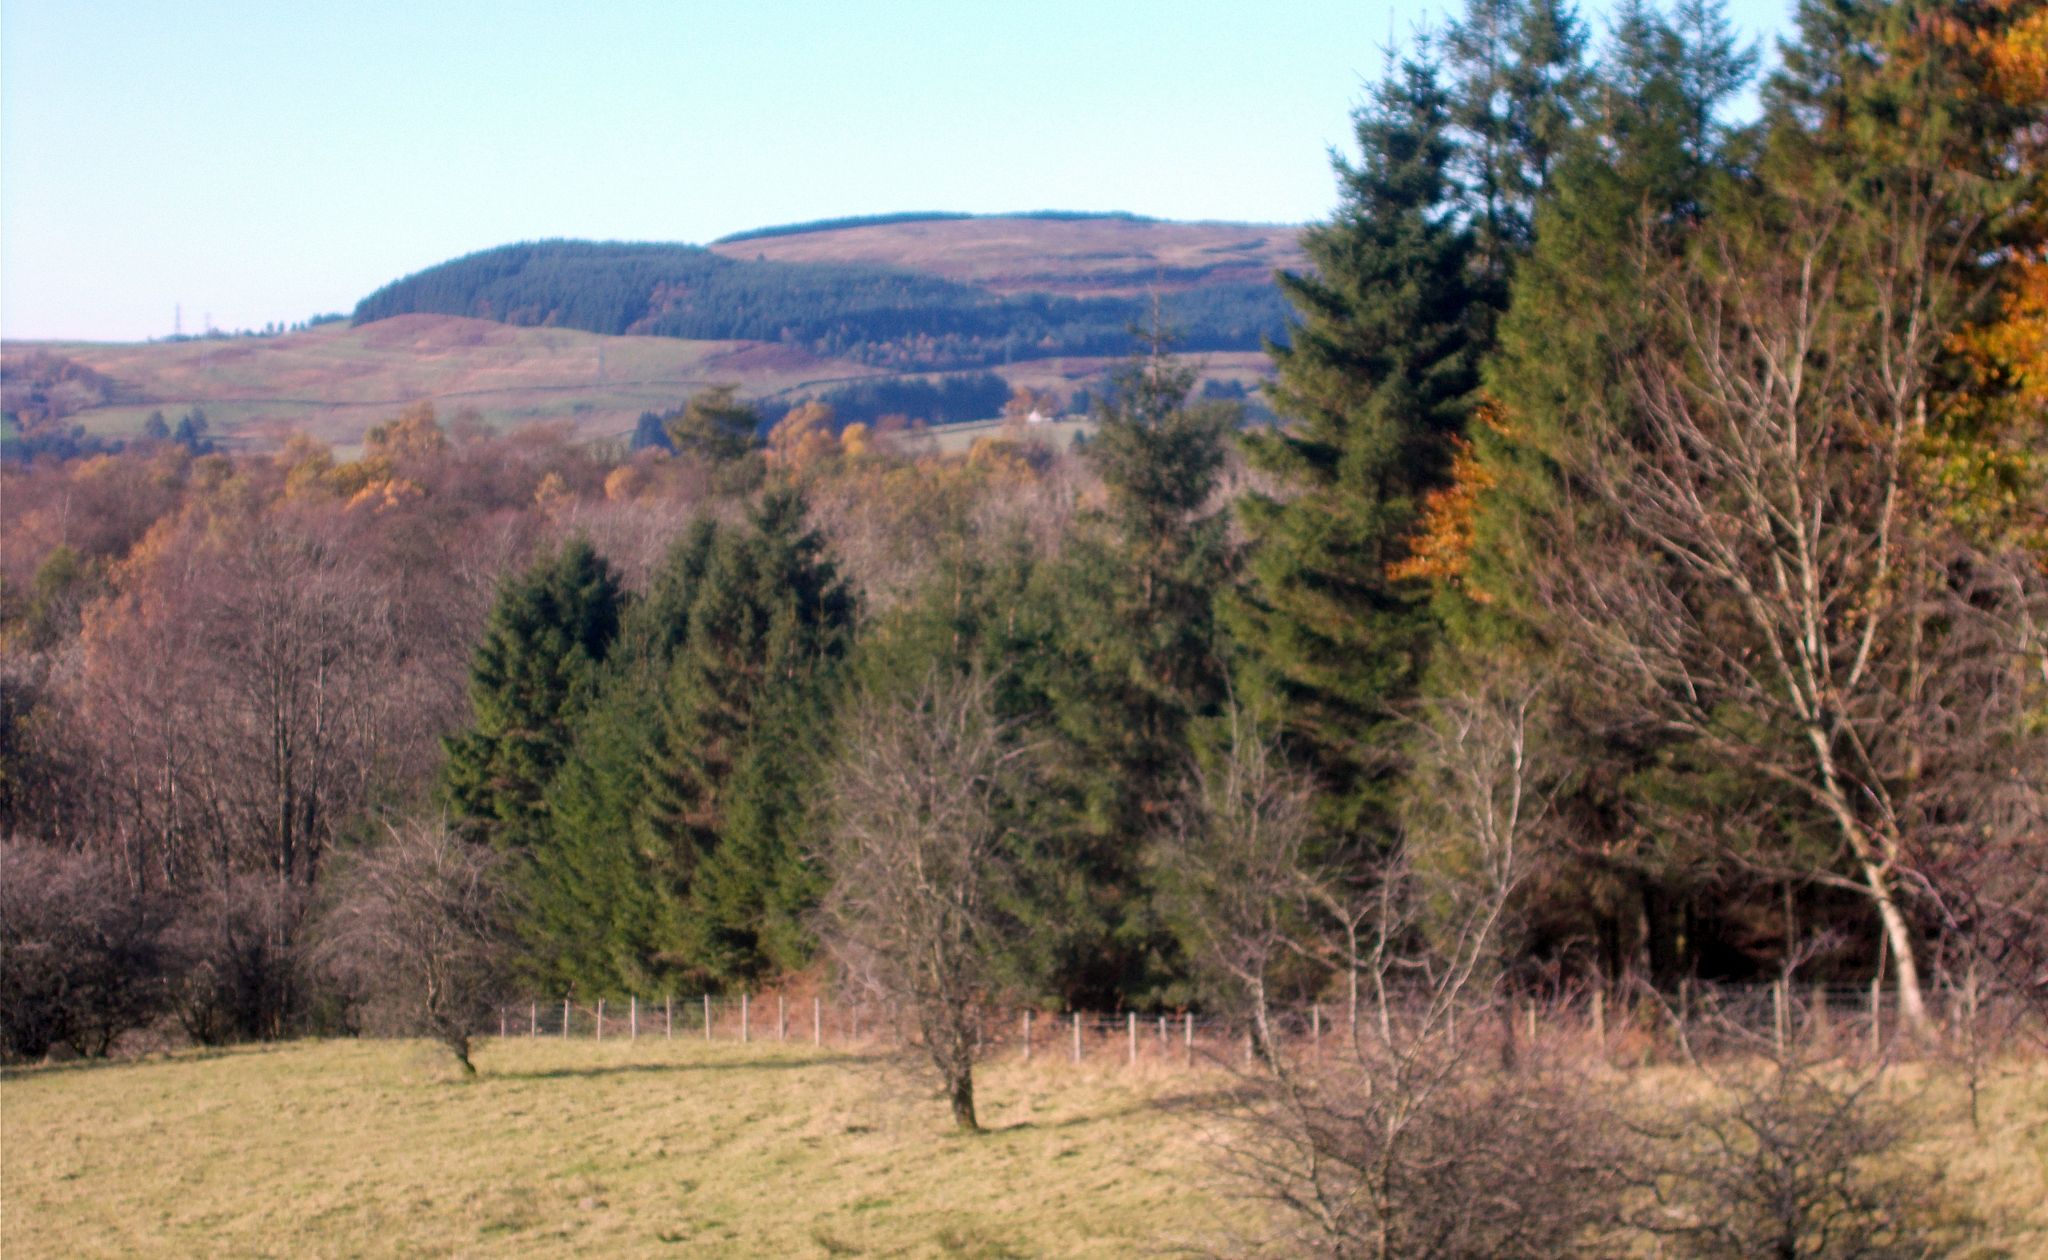 Kilpatrick Hills from moors above Mugdock Country Park